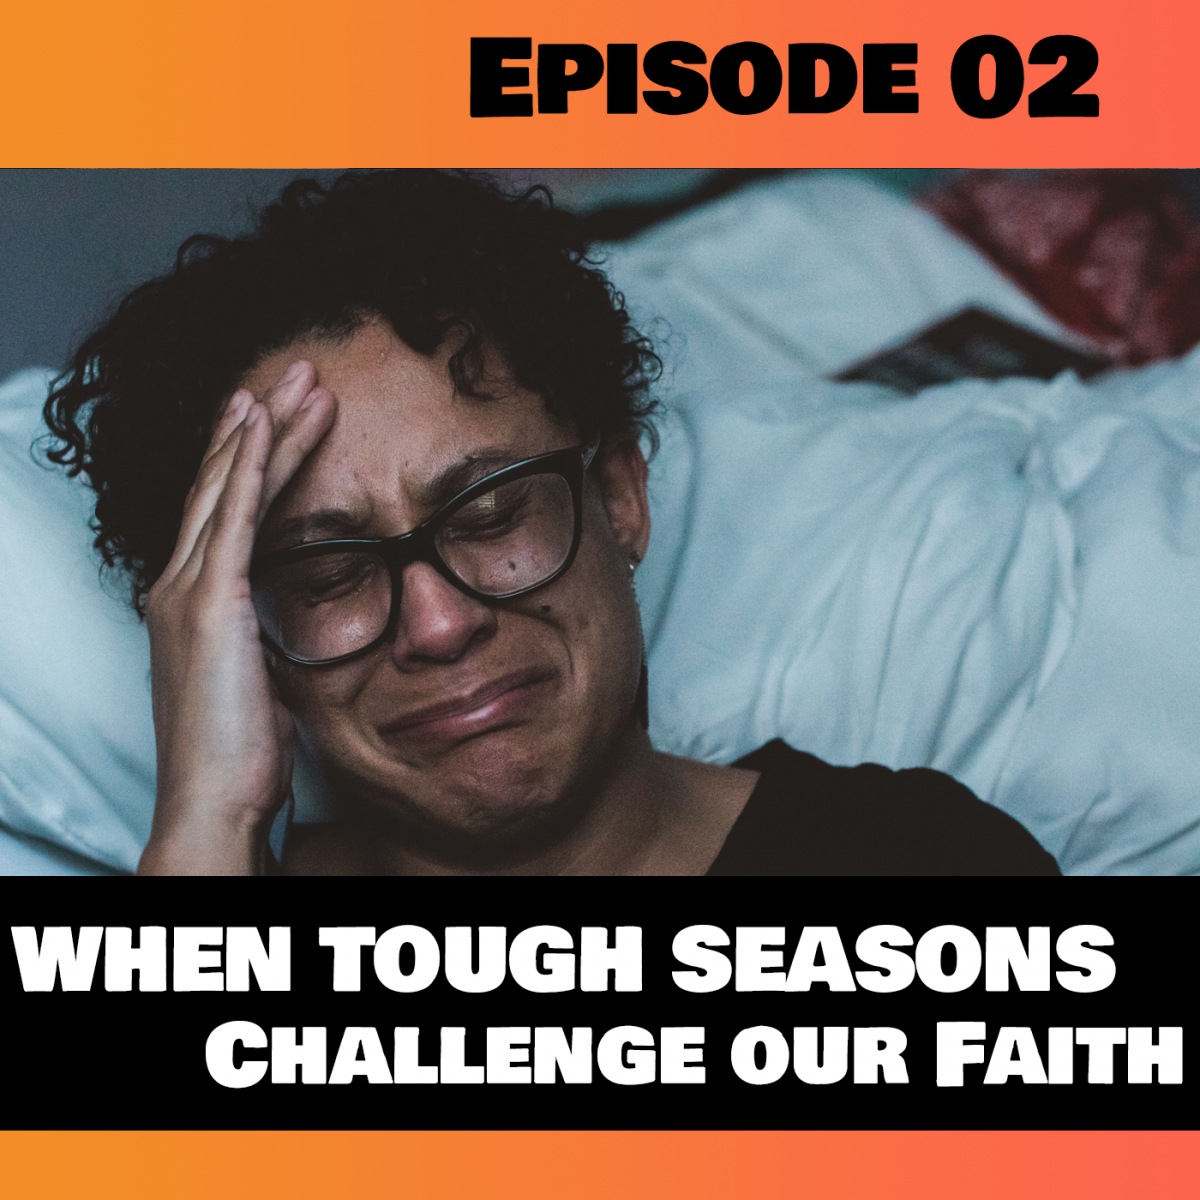 Seasons That Challenge Our Faith